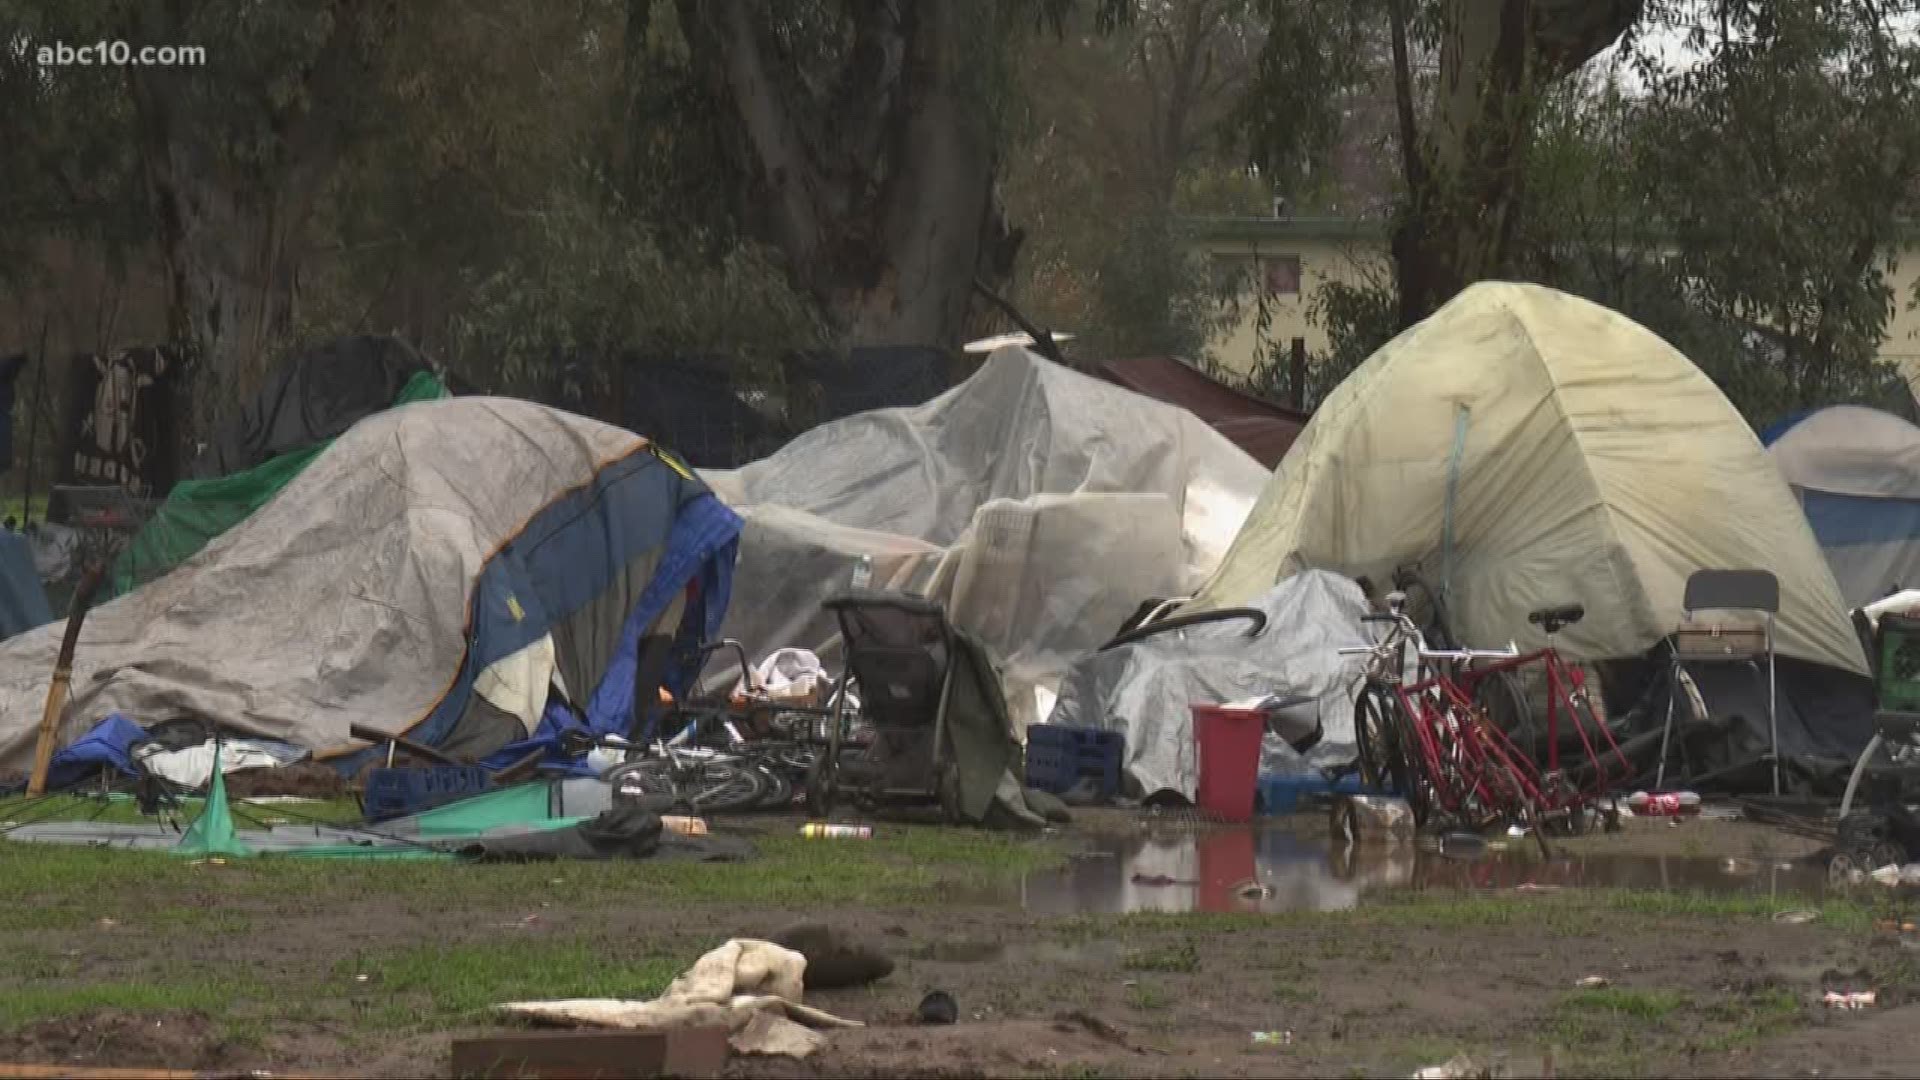 New government data show the number of people experiencing homelessness in Sacramento County has increased 19 percent over the last two years, according to 2019 Sacramento Homeless Point in Time (PIT) Count.